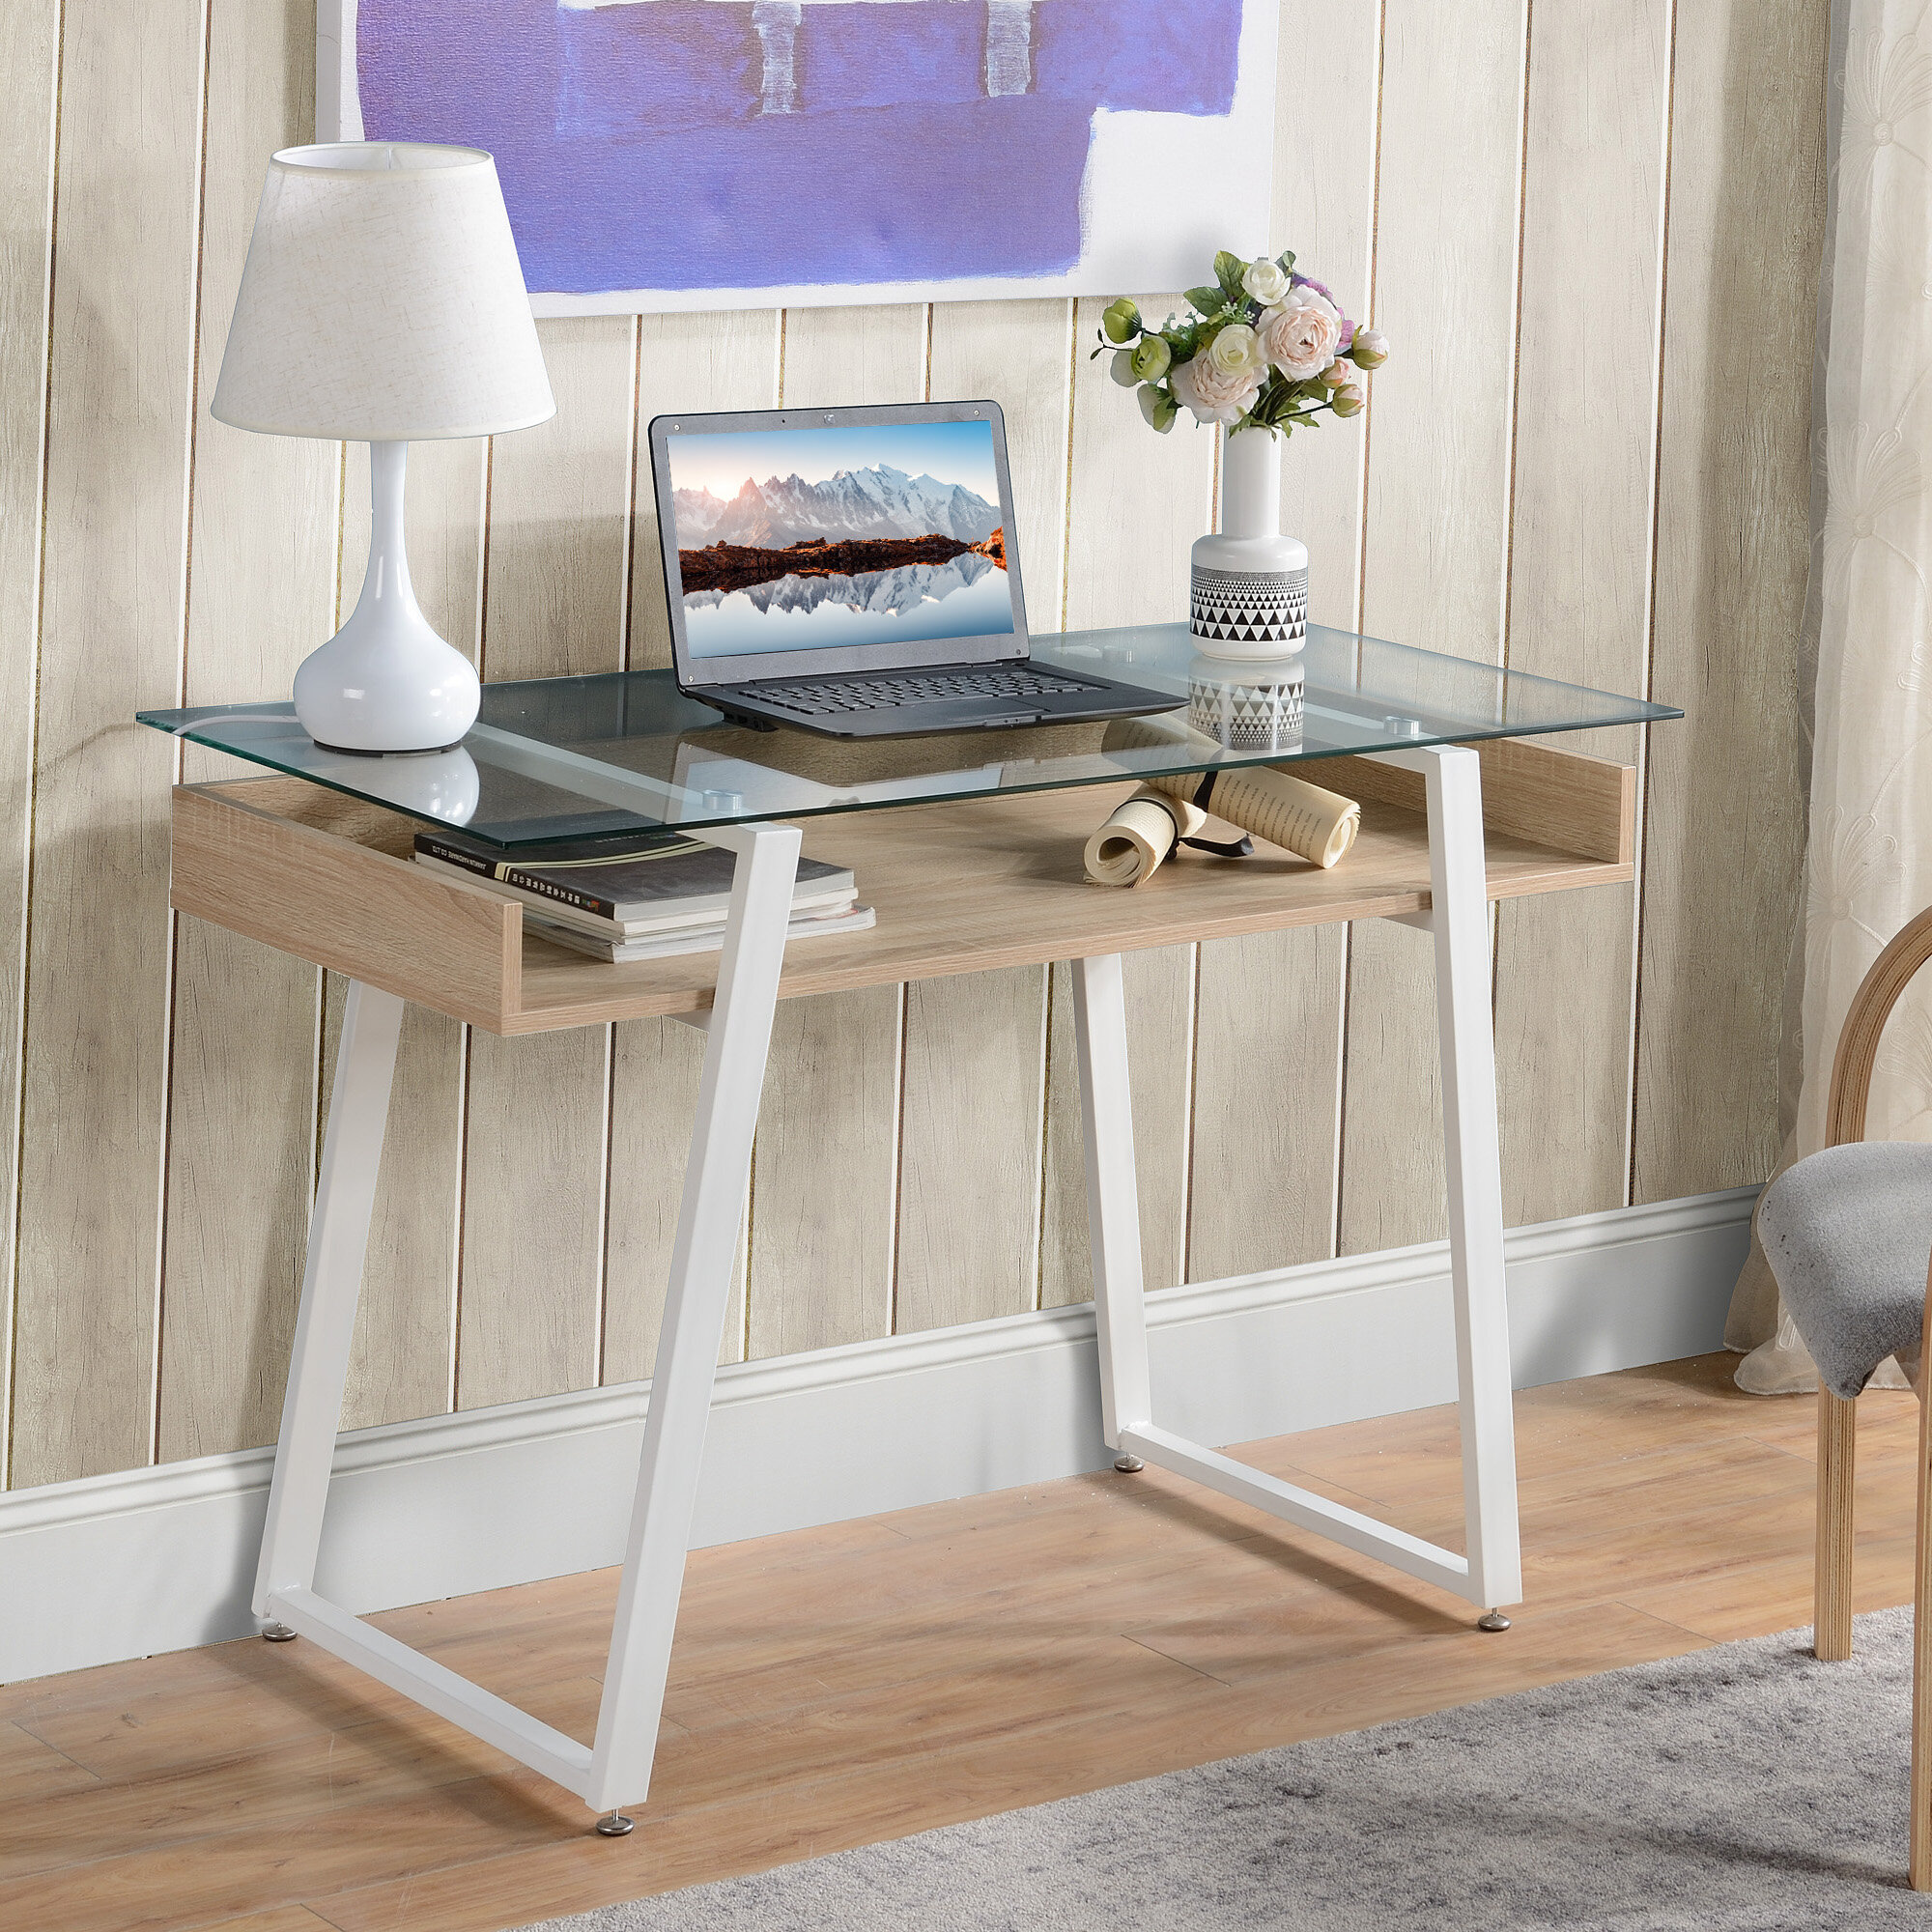 Smart Home 13725 Simple Home Office Computer Writing Student Desk 